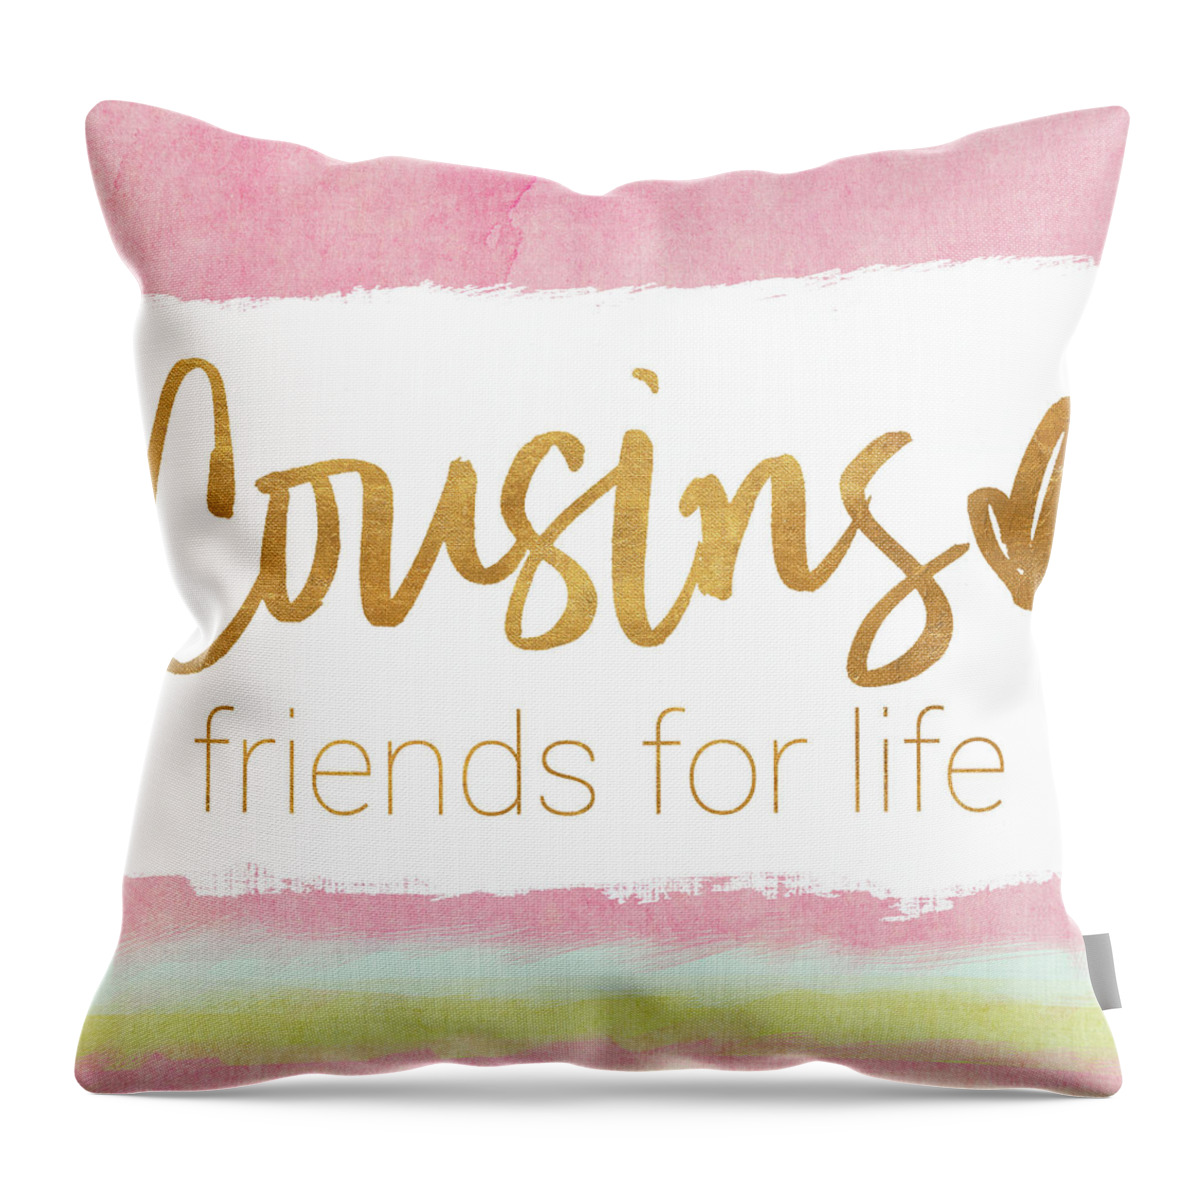 Cousins Throw Pillow featuring the mixed media Cousins Friends For Life by Sd Graphics Studio